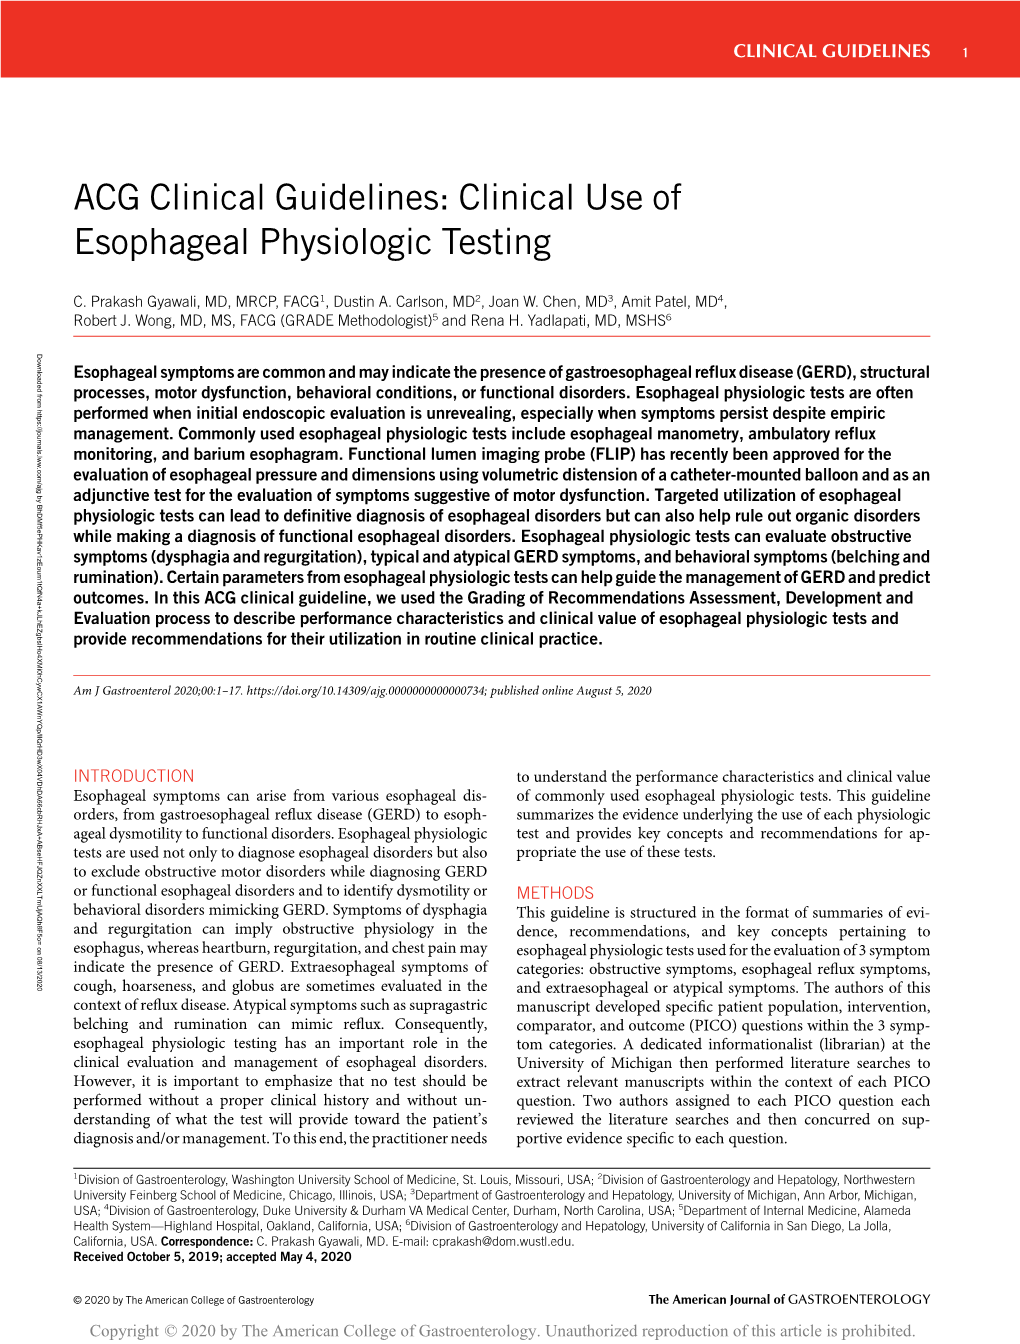 ACG Clinical Guidelines: Clinical Use of Esophageal Physiologic Testing